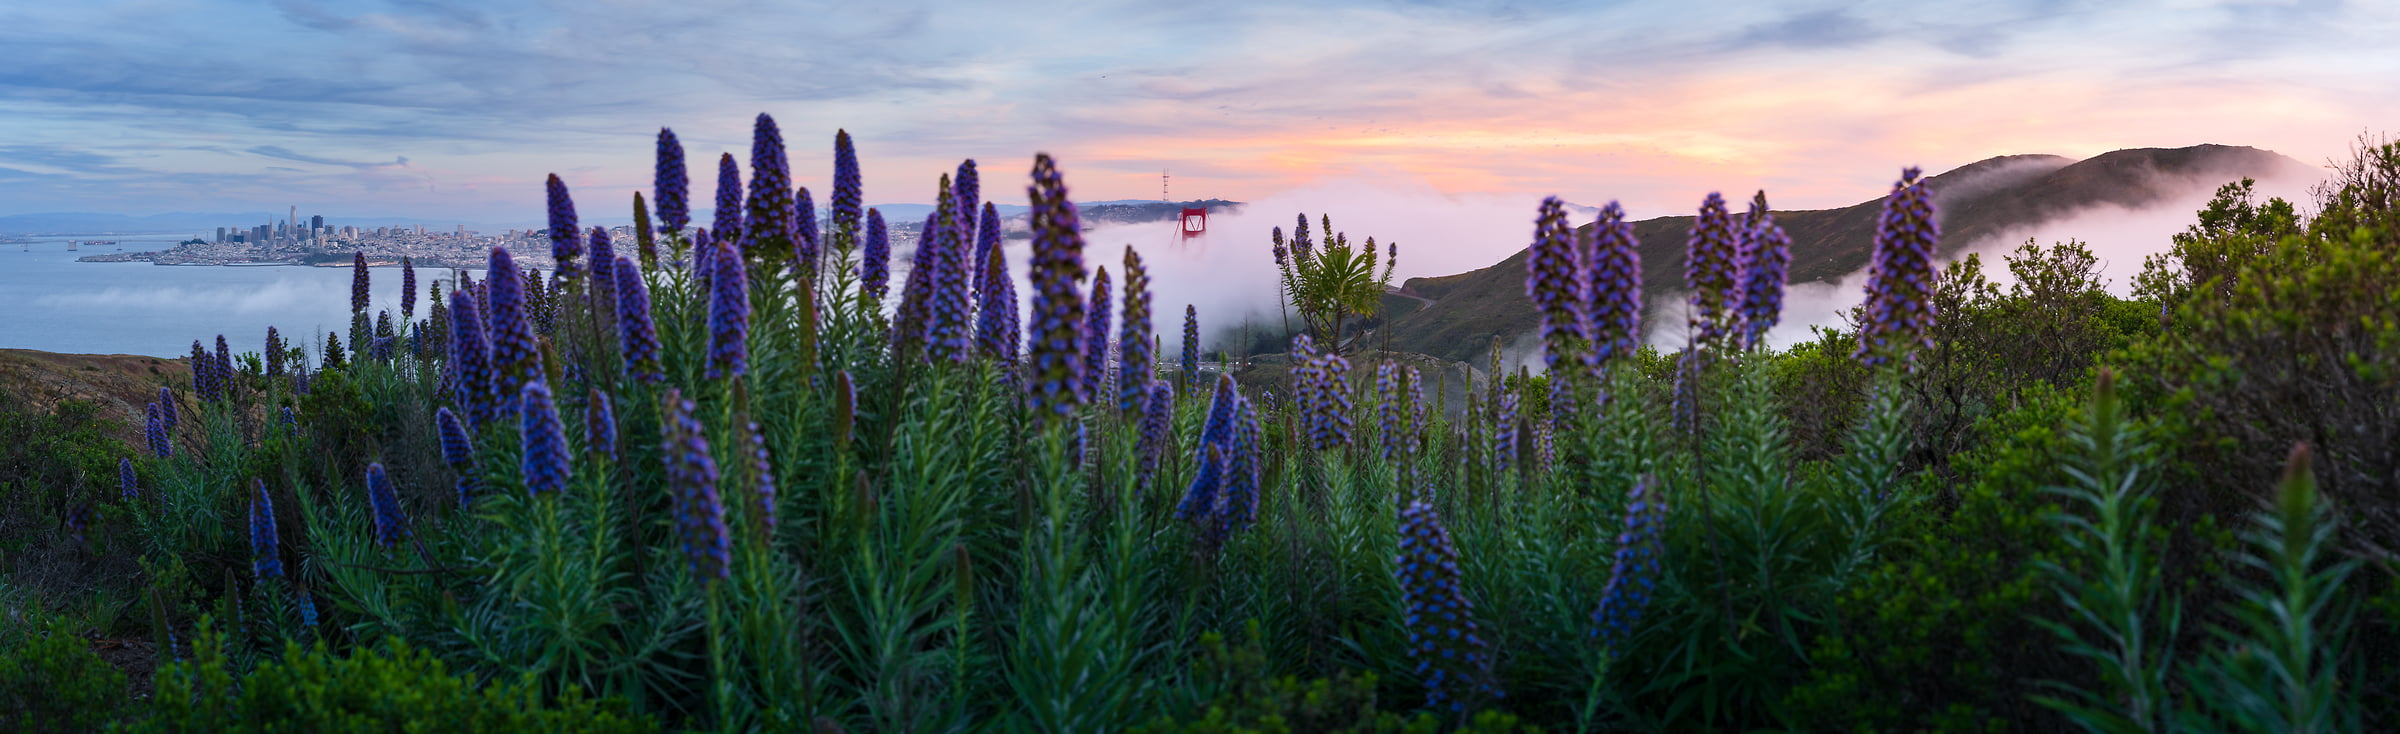 269 megapixels! A very high resolution, large-format VAST photo print of wildflowers with San Francisco and the Golden Gate Bridge in the background; landscape photograph created by Jeff Lewis in Marin Headlands, California.